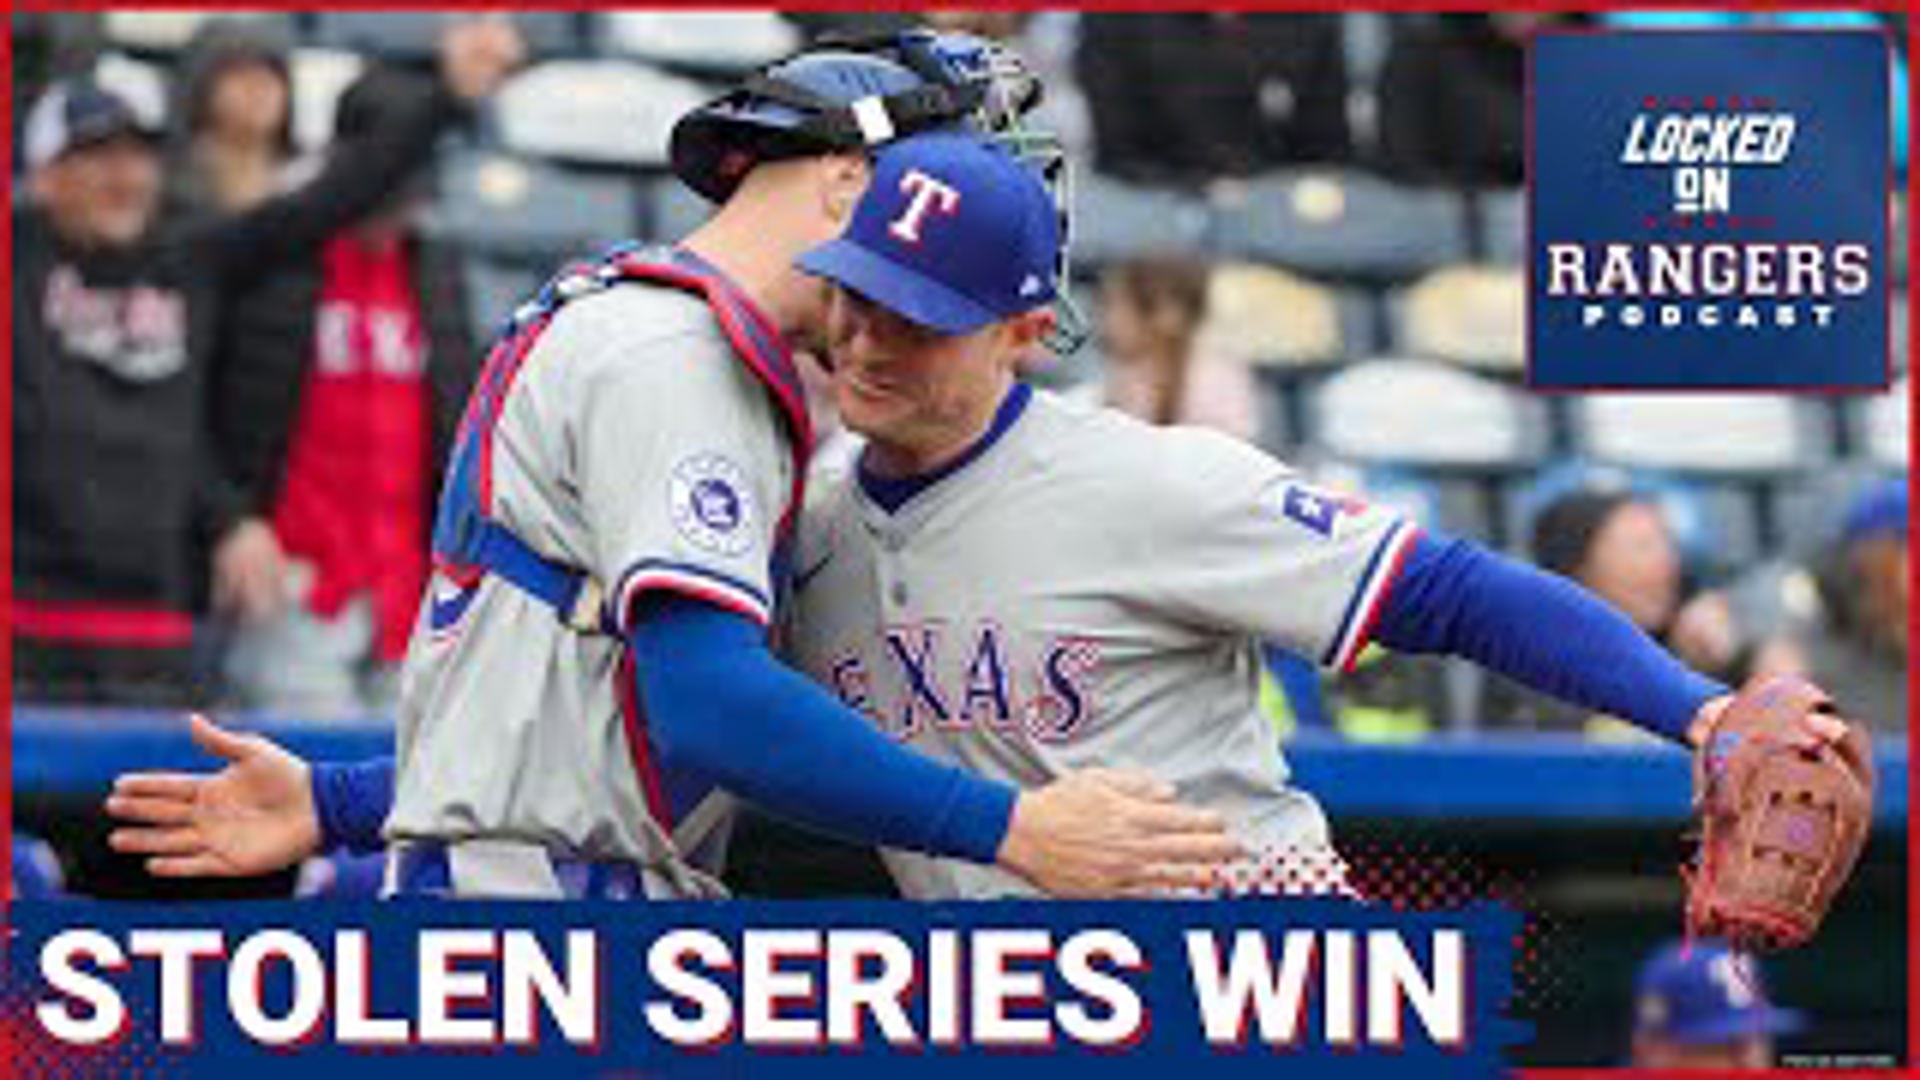 The Texas Rangers continued to pile up series wins by stealing one against the Kansas City Royals, but lost Wyatt Langford to a hamstring injury.